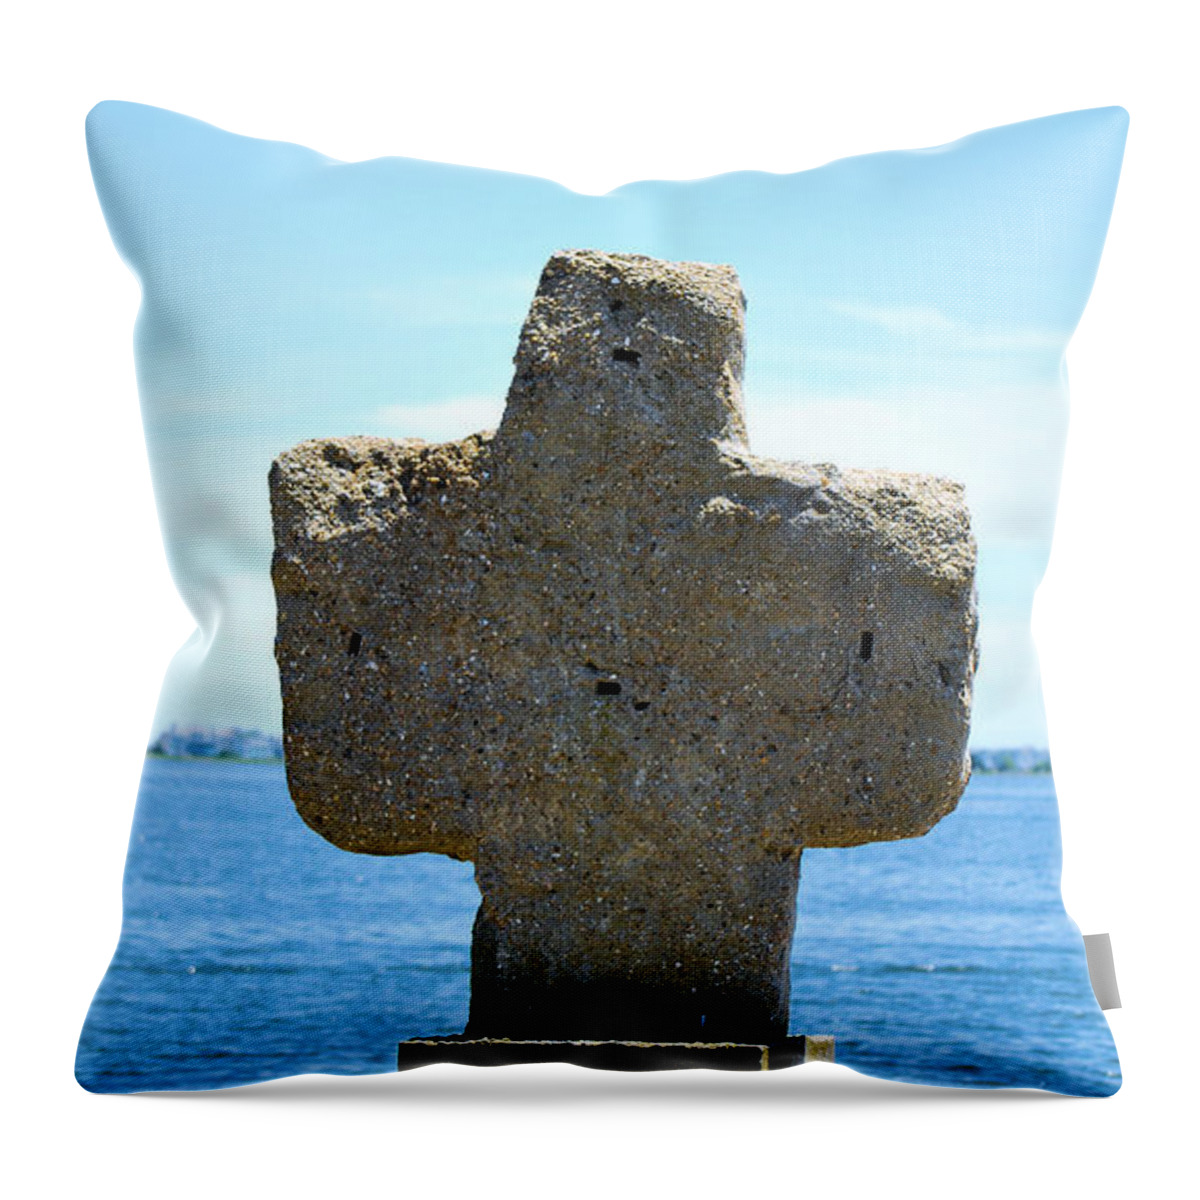 Water Throw Pillow featuring the photograph Mariners Cross by Bob Sample